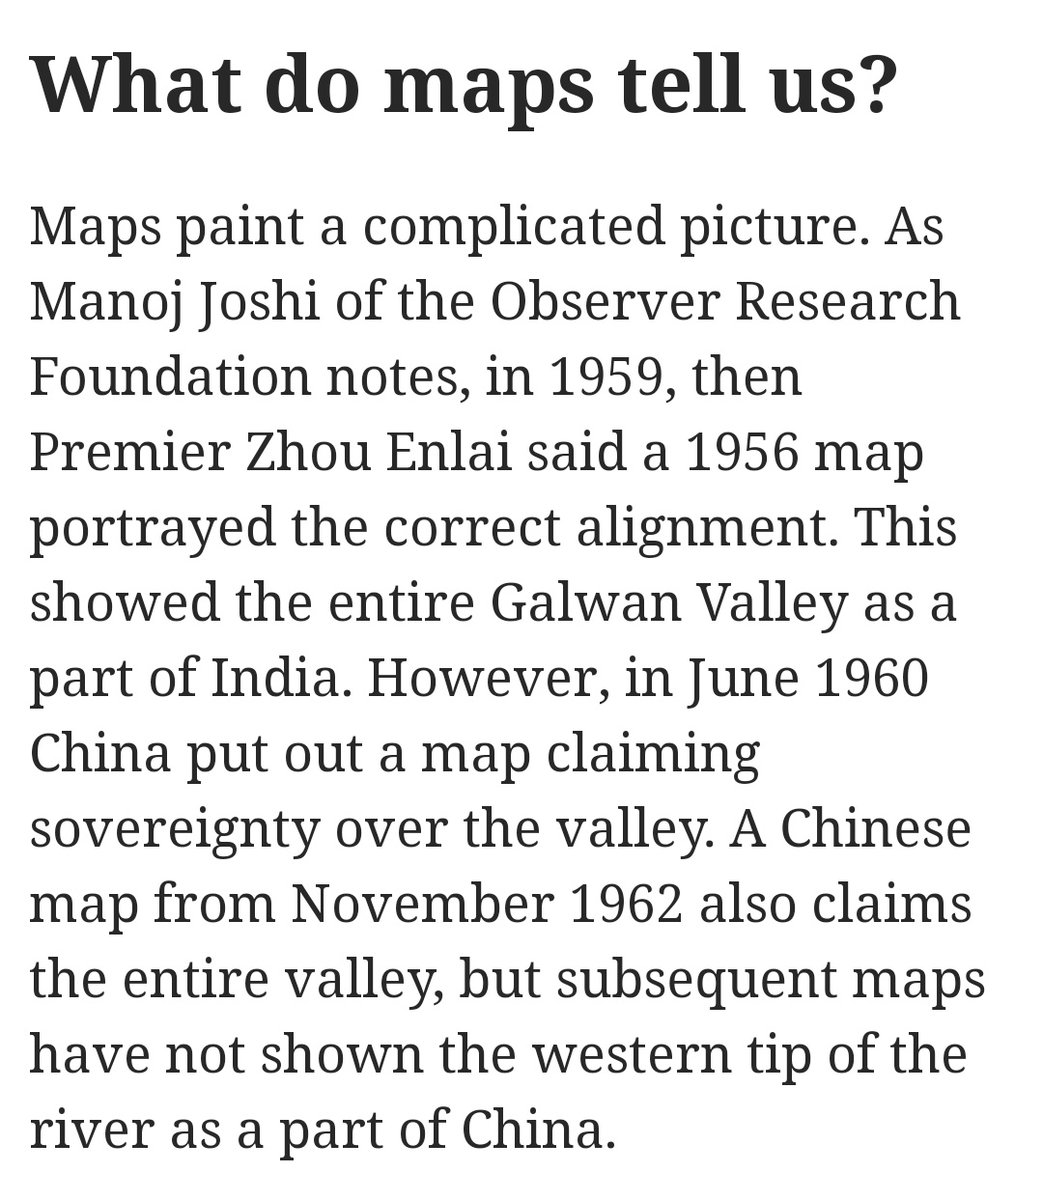 Of course, neither nation has exactly covered itself in glory in the dispute.China's claim line in the Galwan Valley (site of current clashes) has kept changing. It's 1956 map was different from that of 1960. Then it kept mum about the area for decades. https://www.thehindu.com/news/national/the-hindu-explains-who-does-galwan-valley-belong-to/article31879418.ece